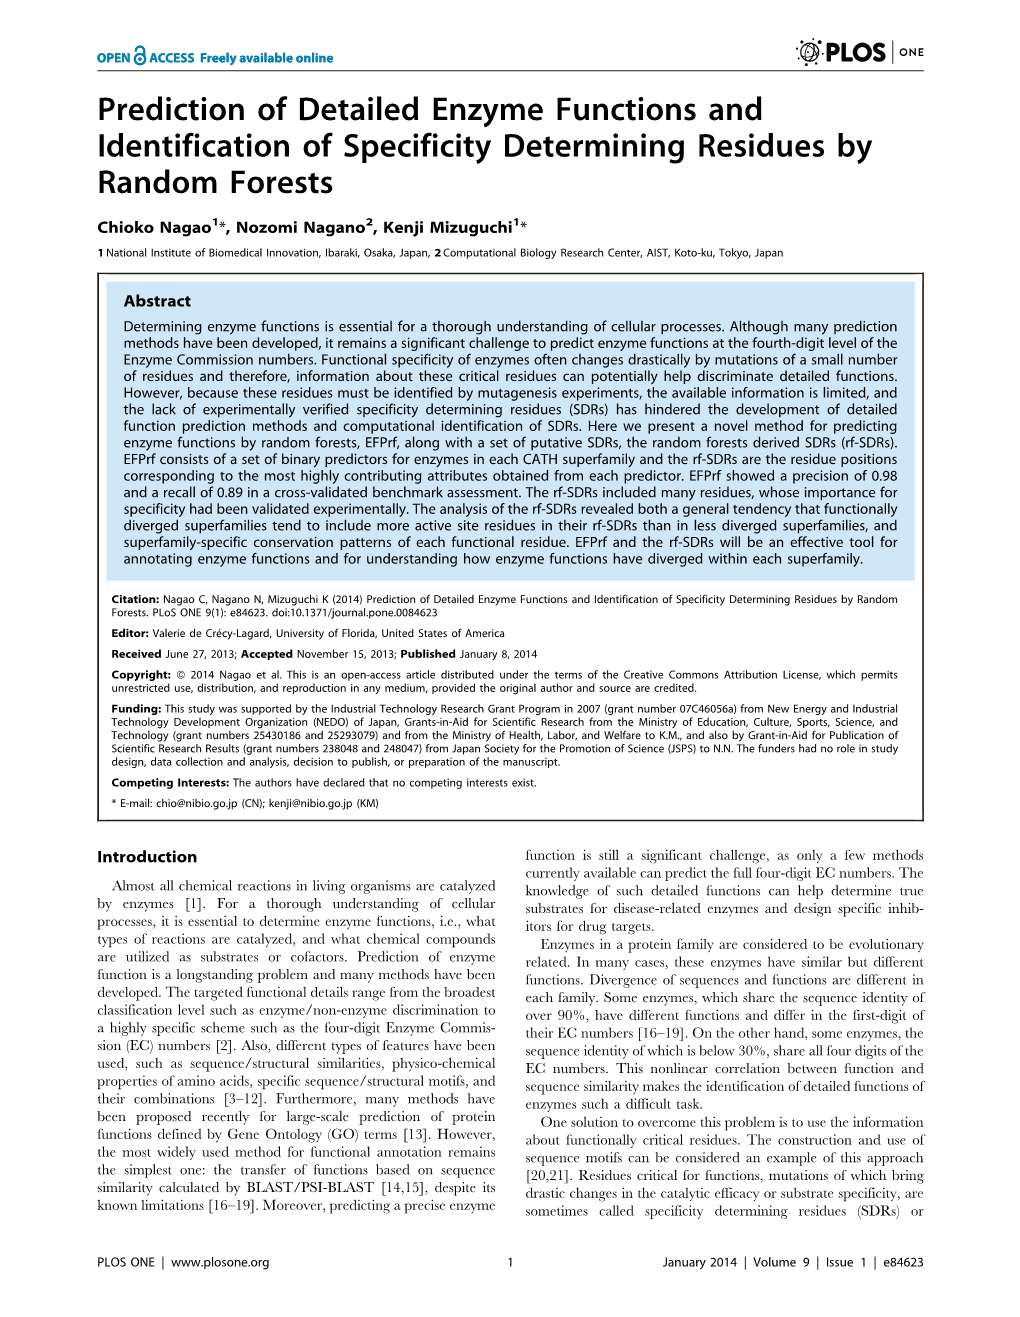 Prediction of Detailed Enzyme Functions and Identification of Specificity Determining Residues by Random Forests